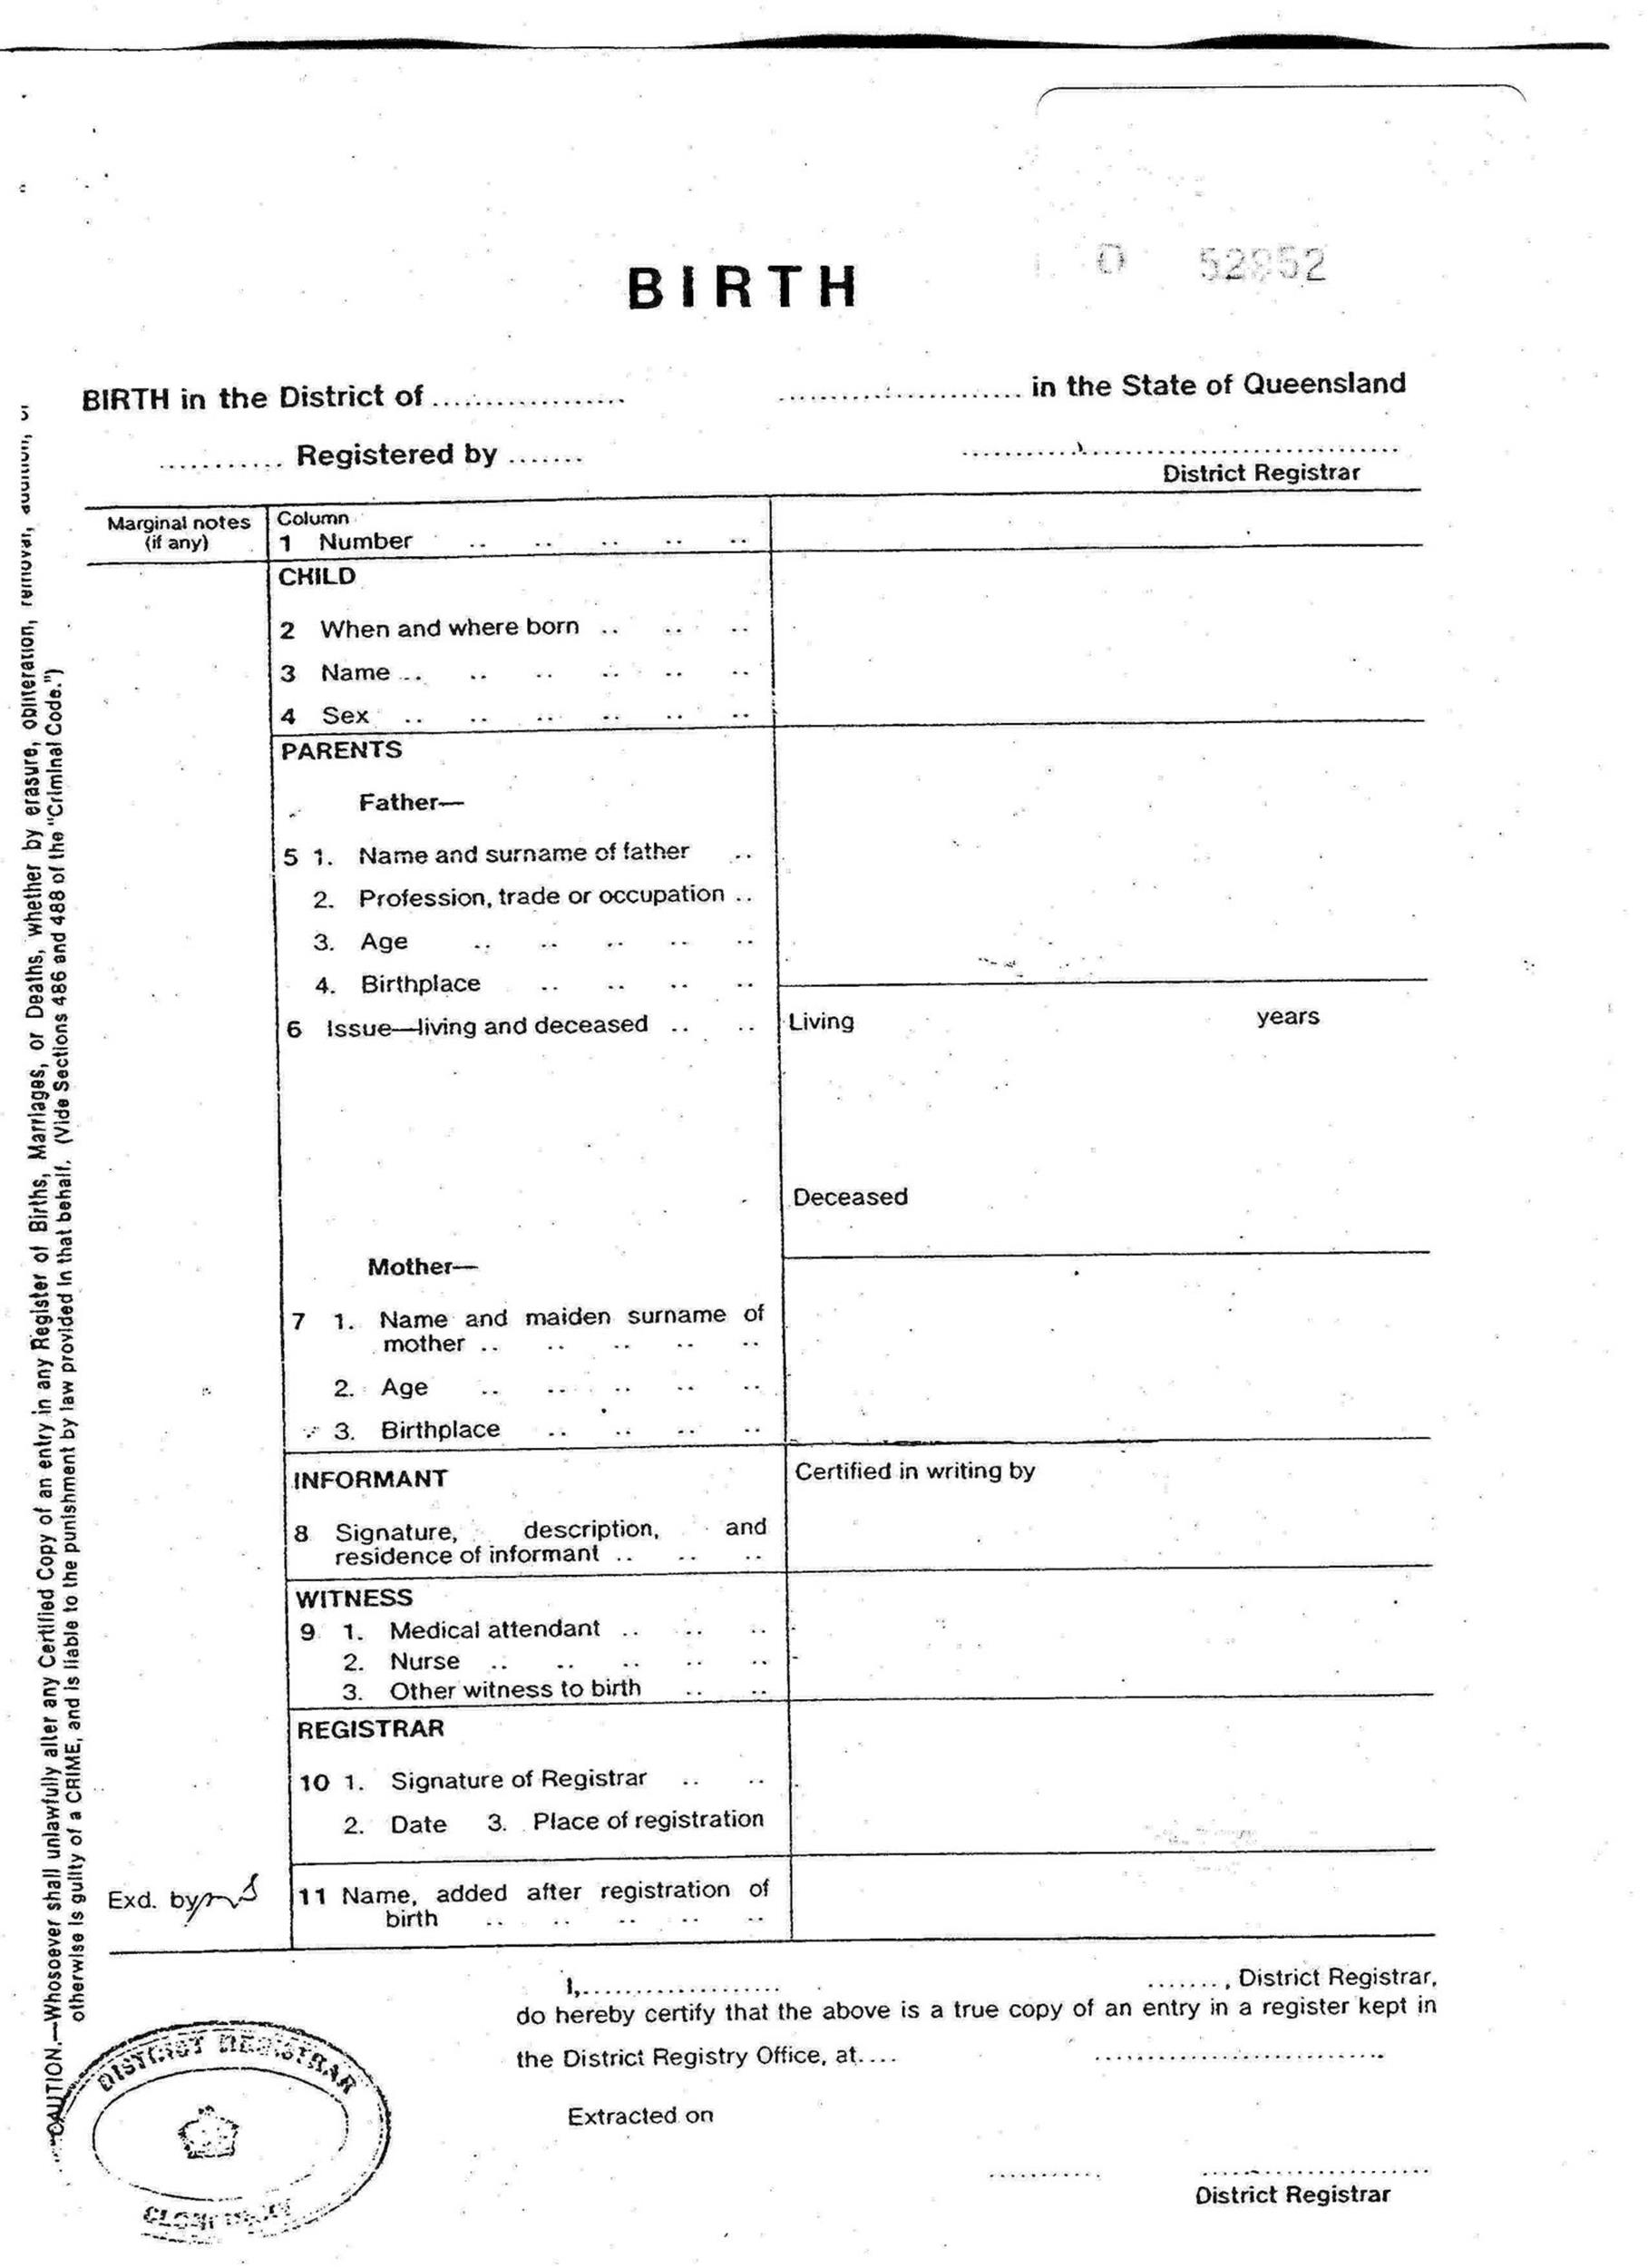 fillable-birth-certificate-format-in-english-pdf-tutore-org-master-of-documents